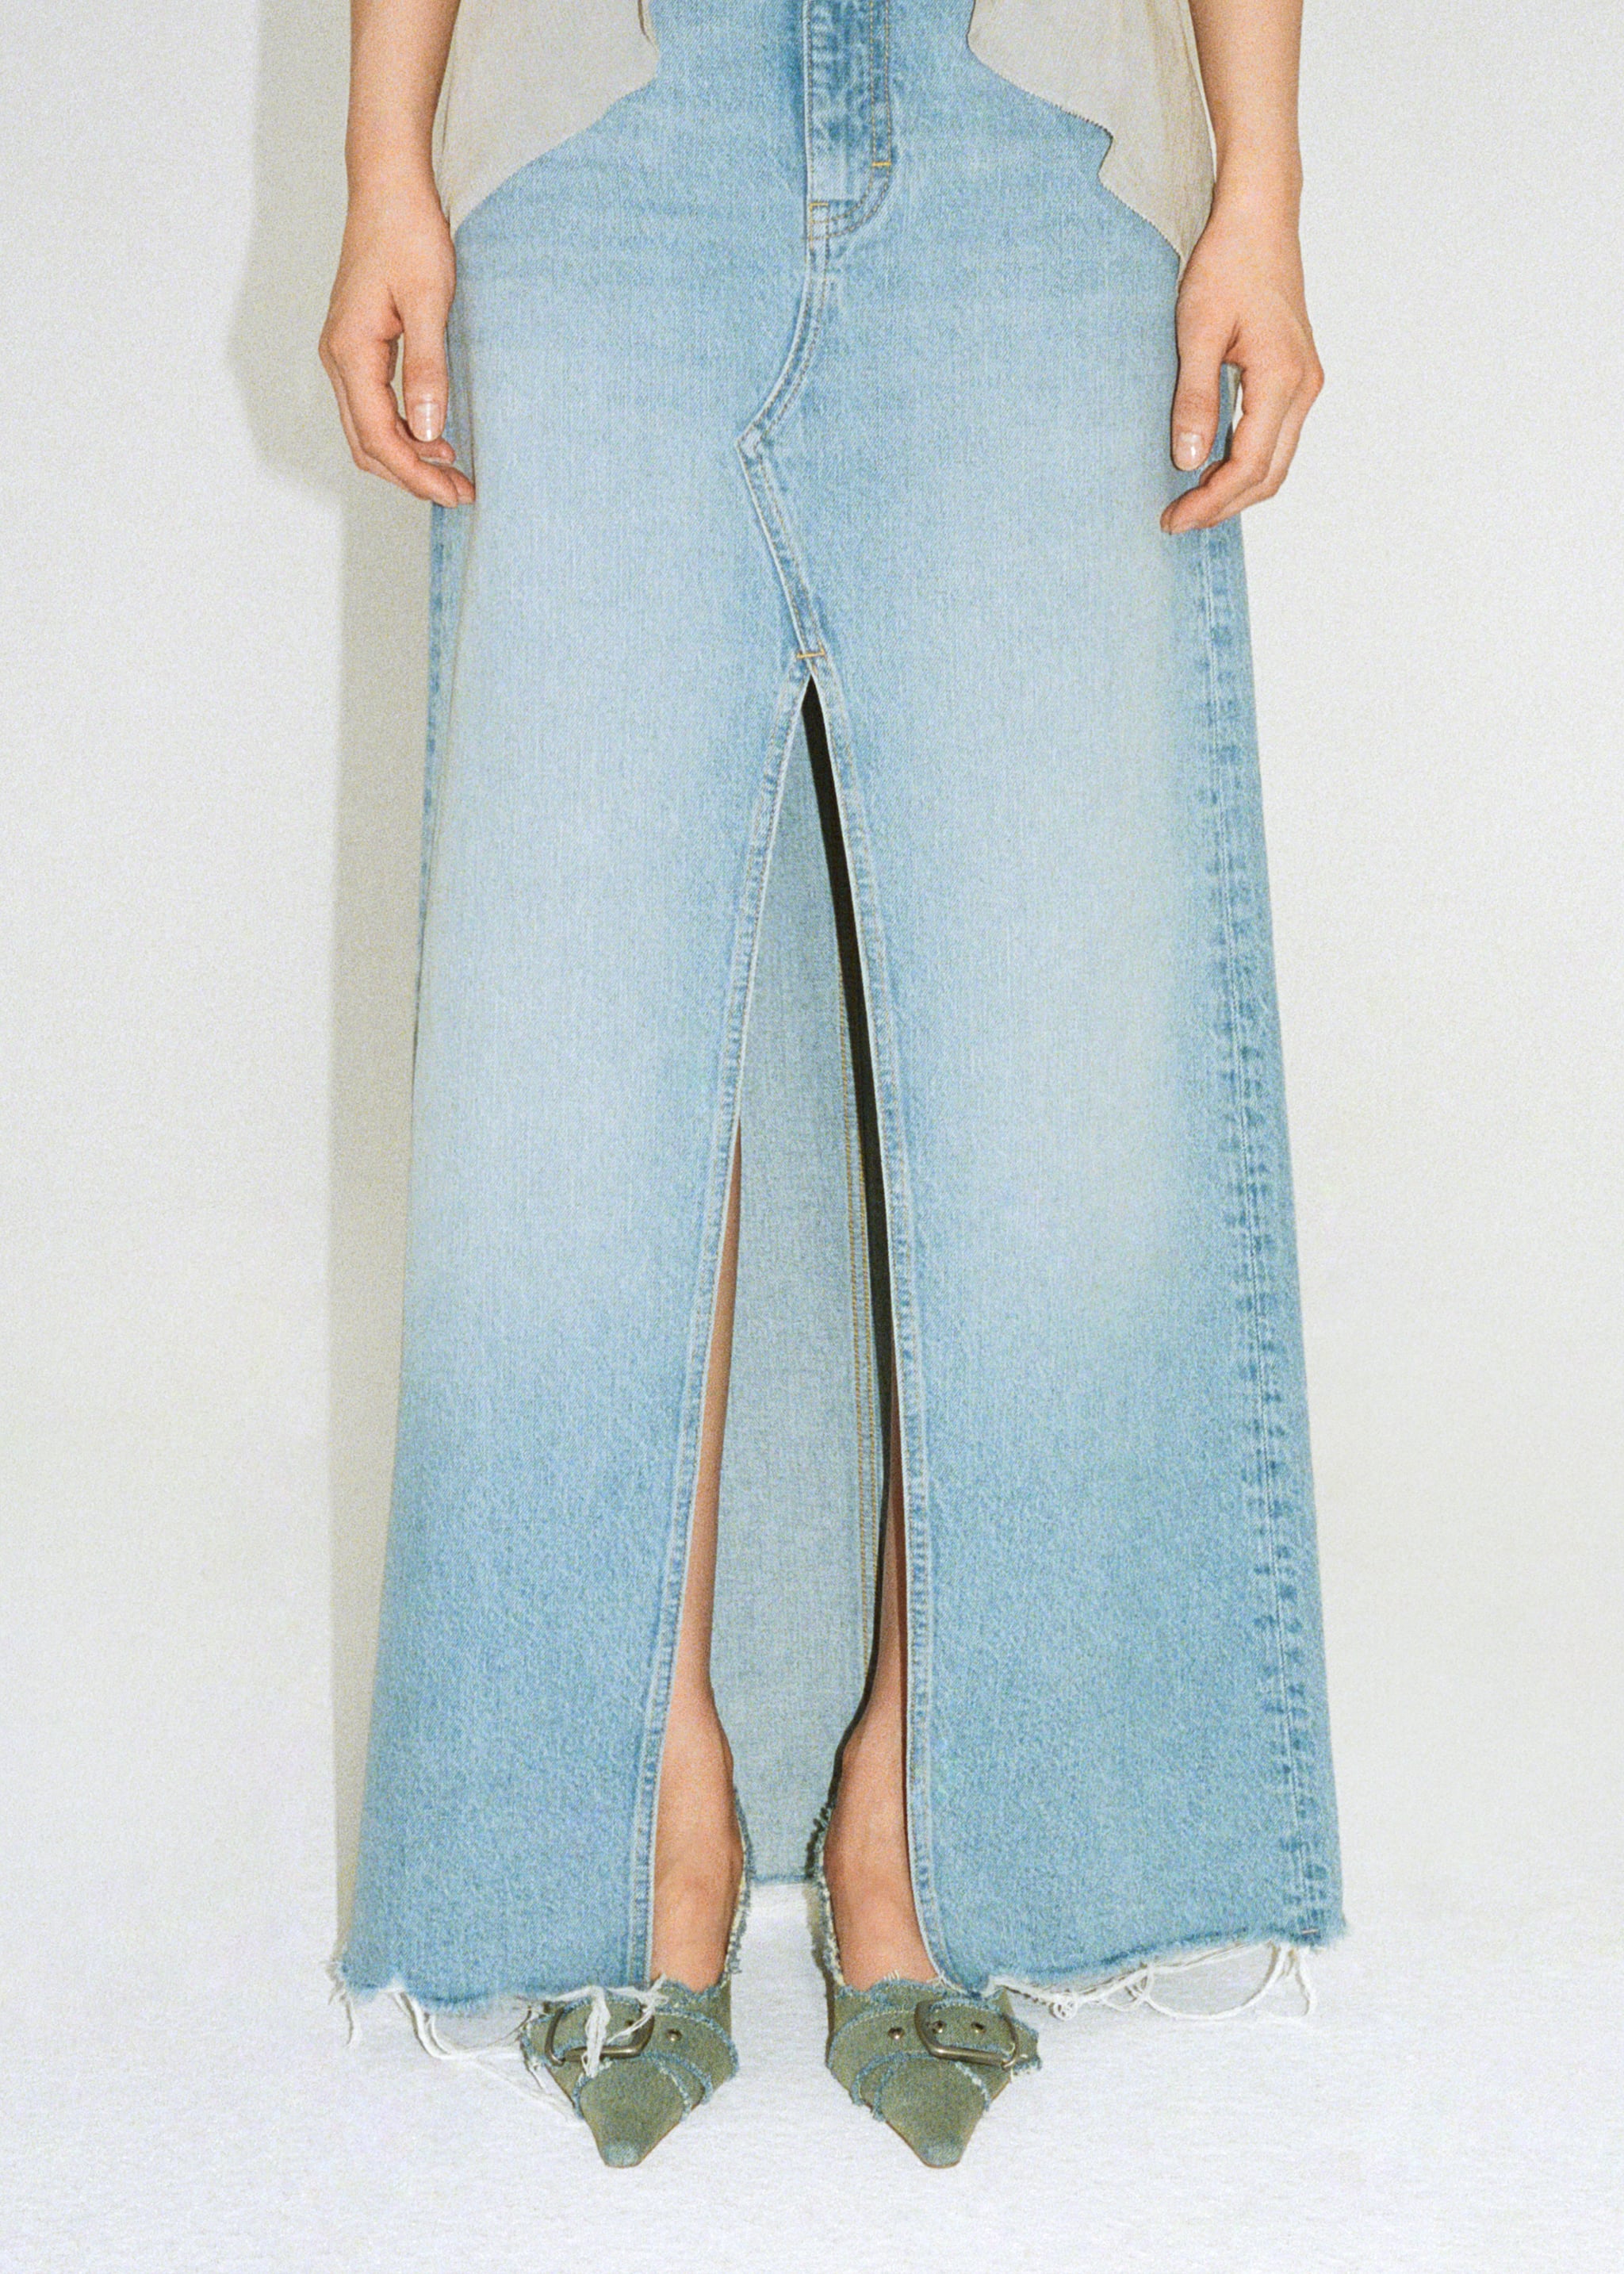 Denim skirt with frayed hem - Details of the article 7